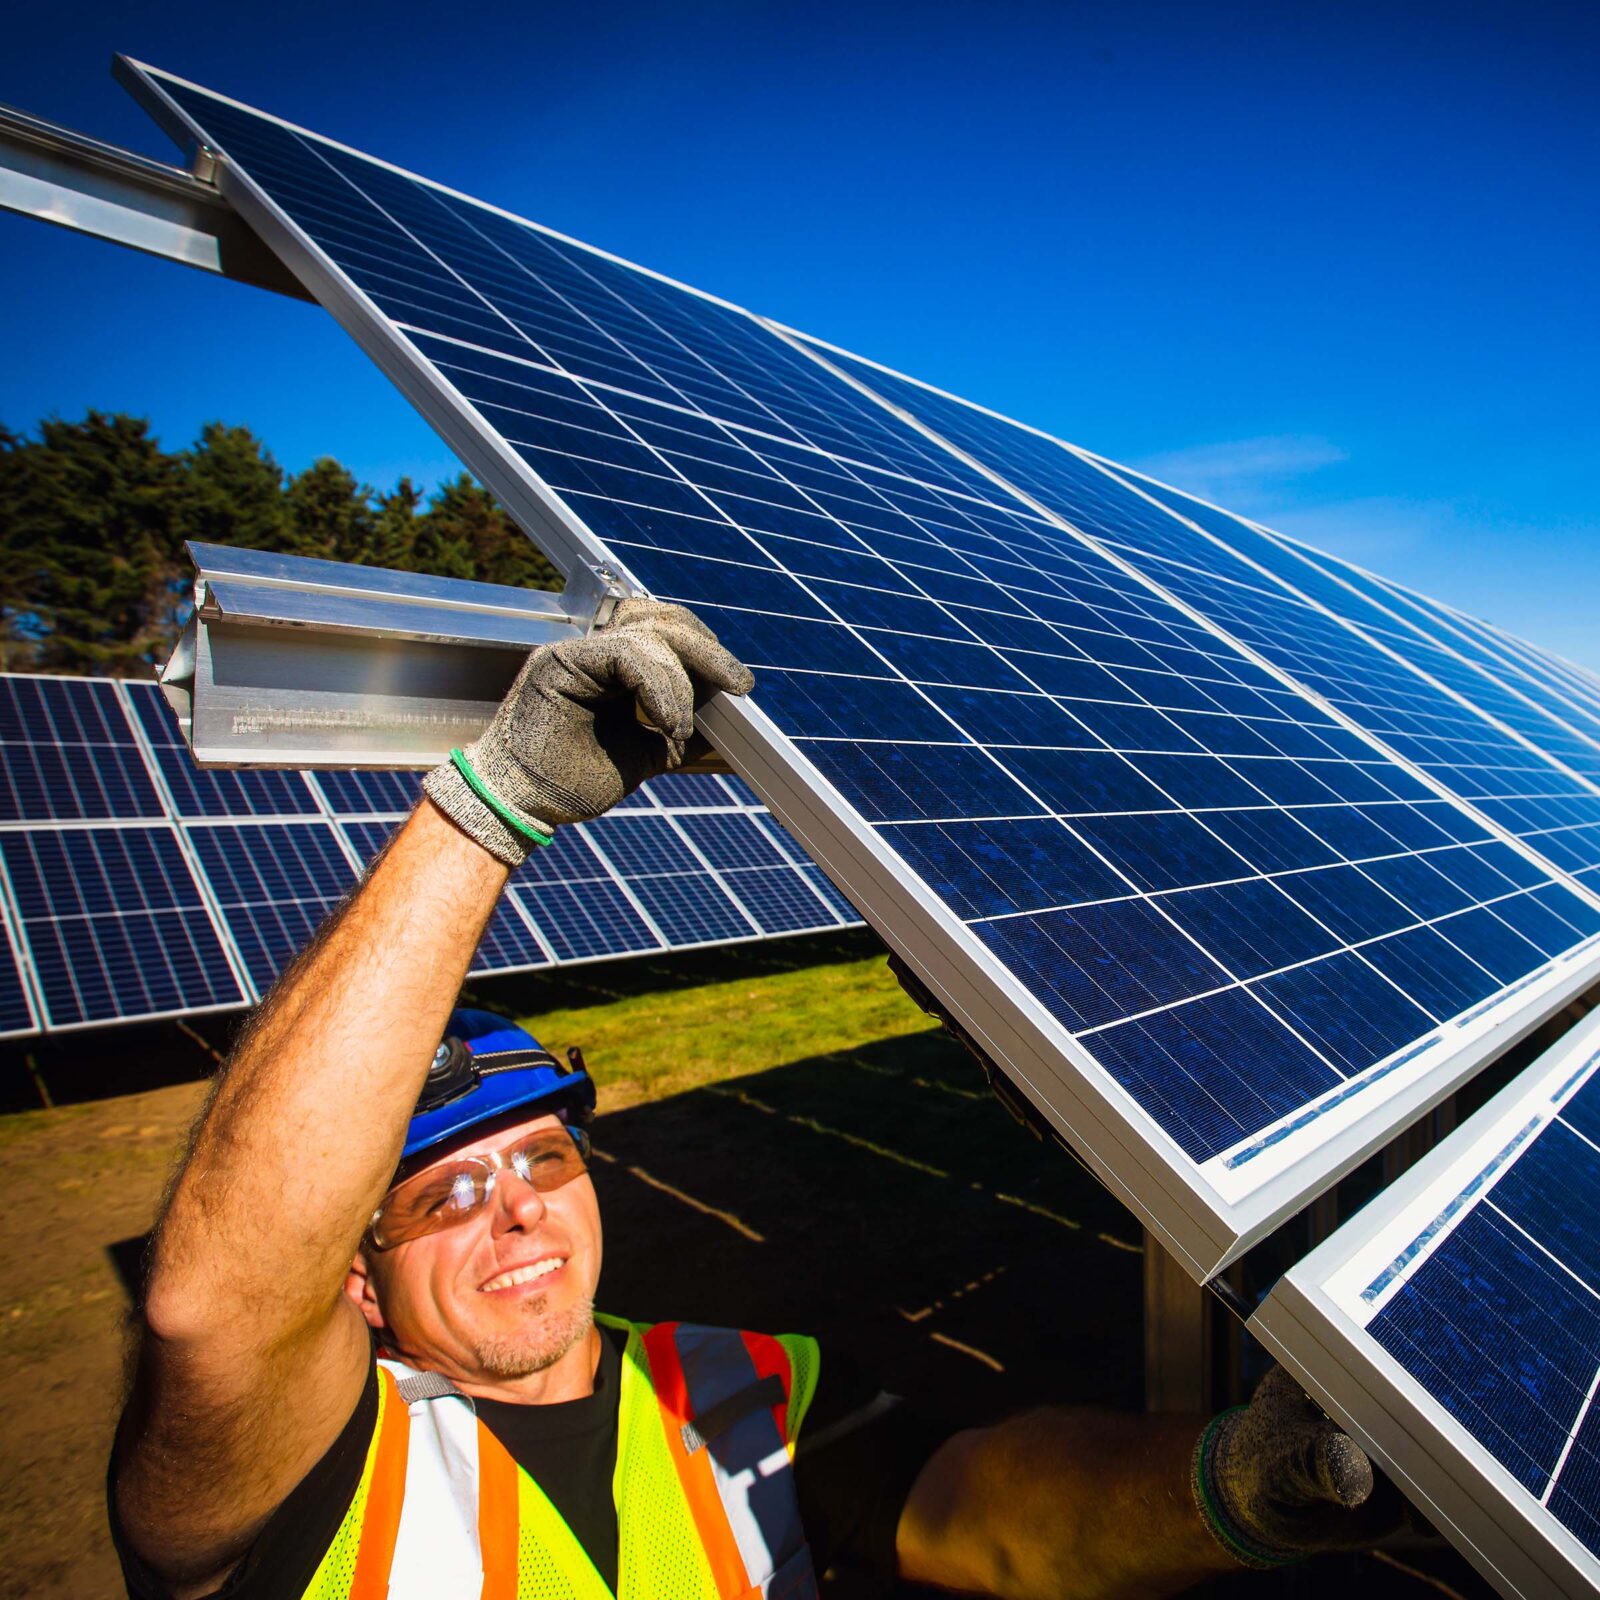 Worker carrying and inserting a solar panel